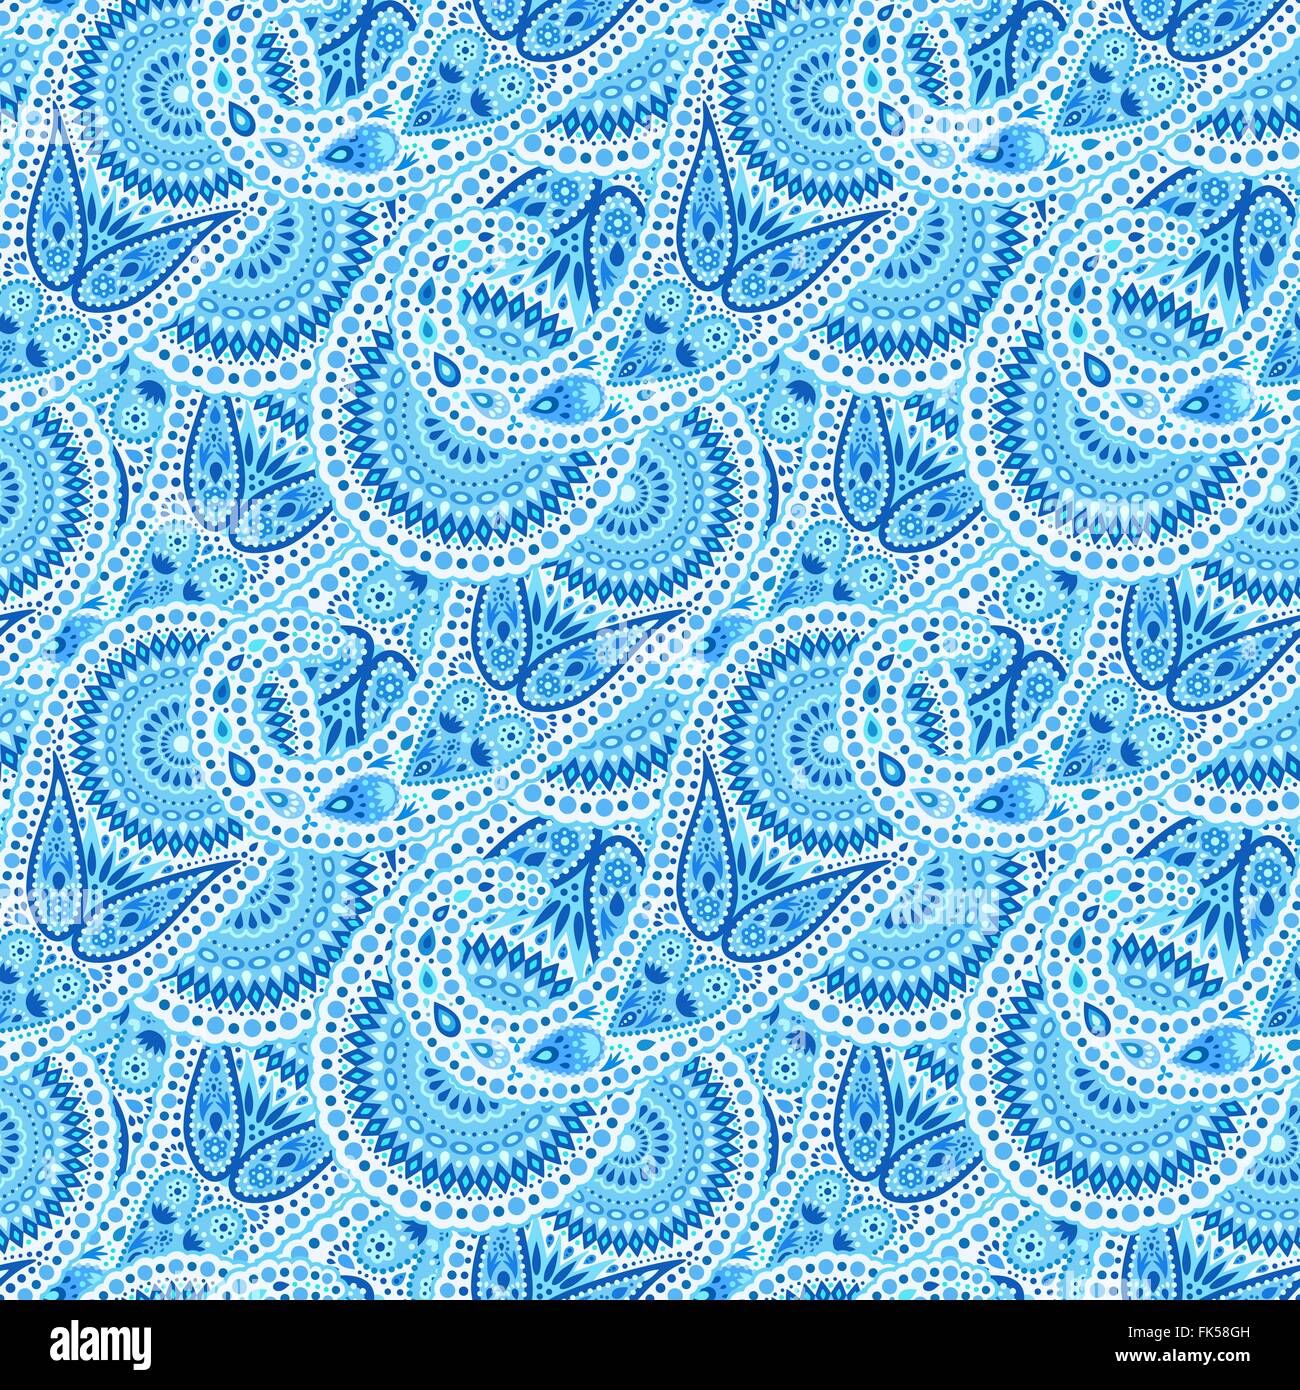 Solid Blue Waves Paisley Pattern Stock Vector